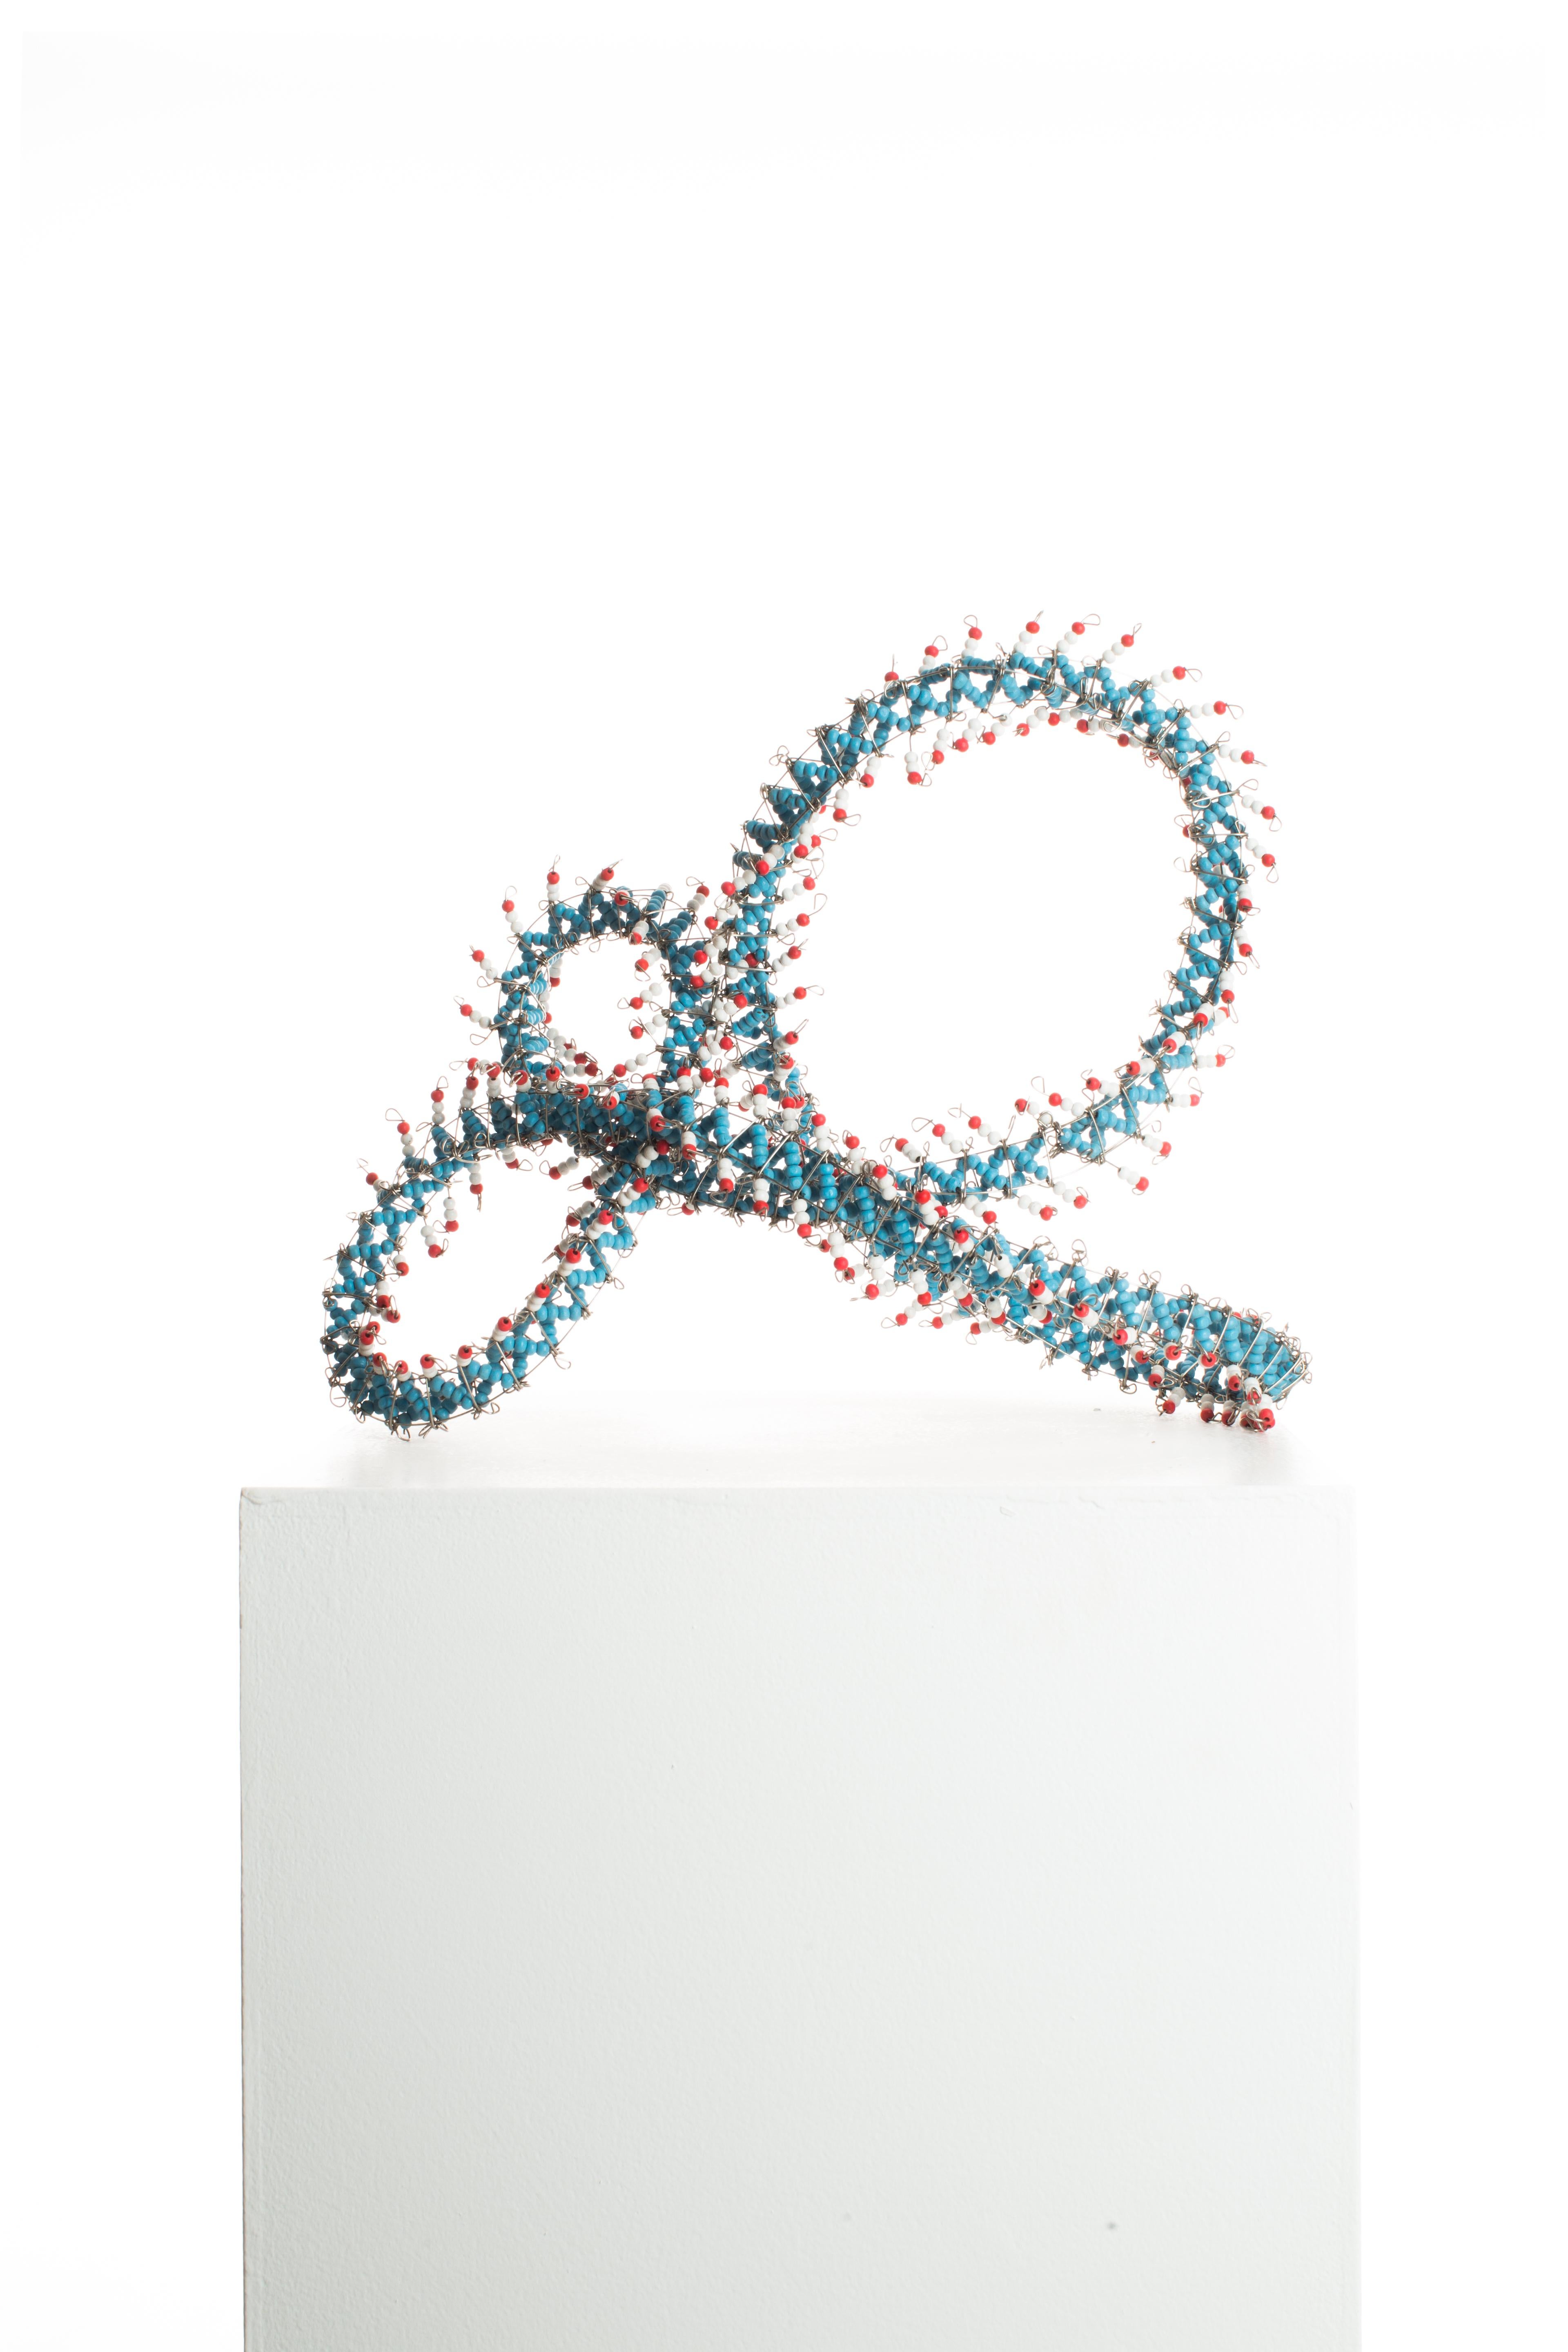 Driaan Claassen Abstract Sculpture - Blue, Red, White, Beaded, Steel, Pattern, Abstract, Contemporary, Modern, Art